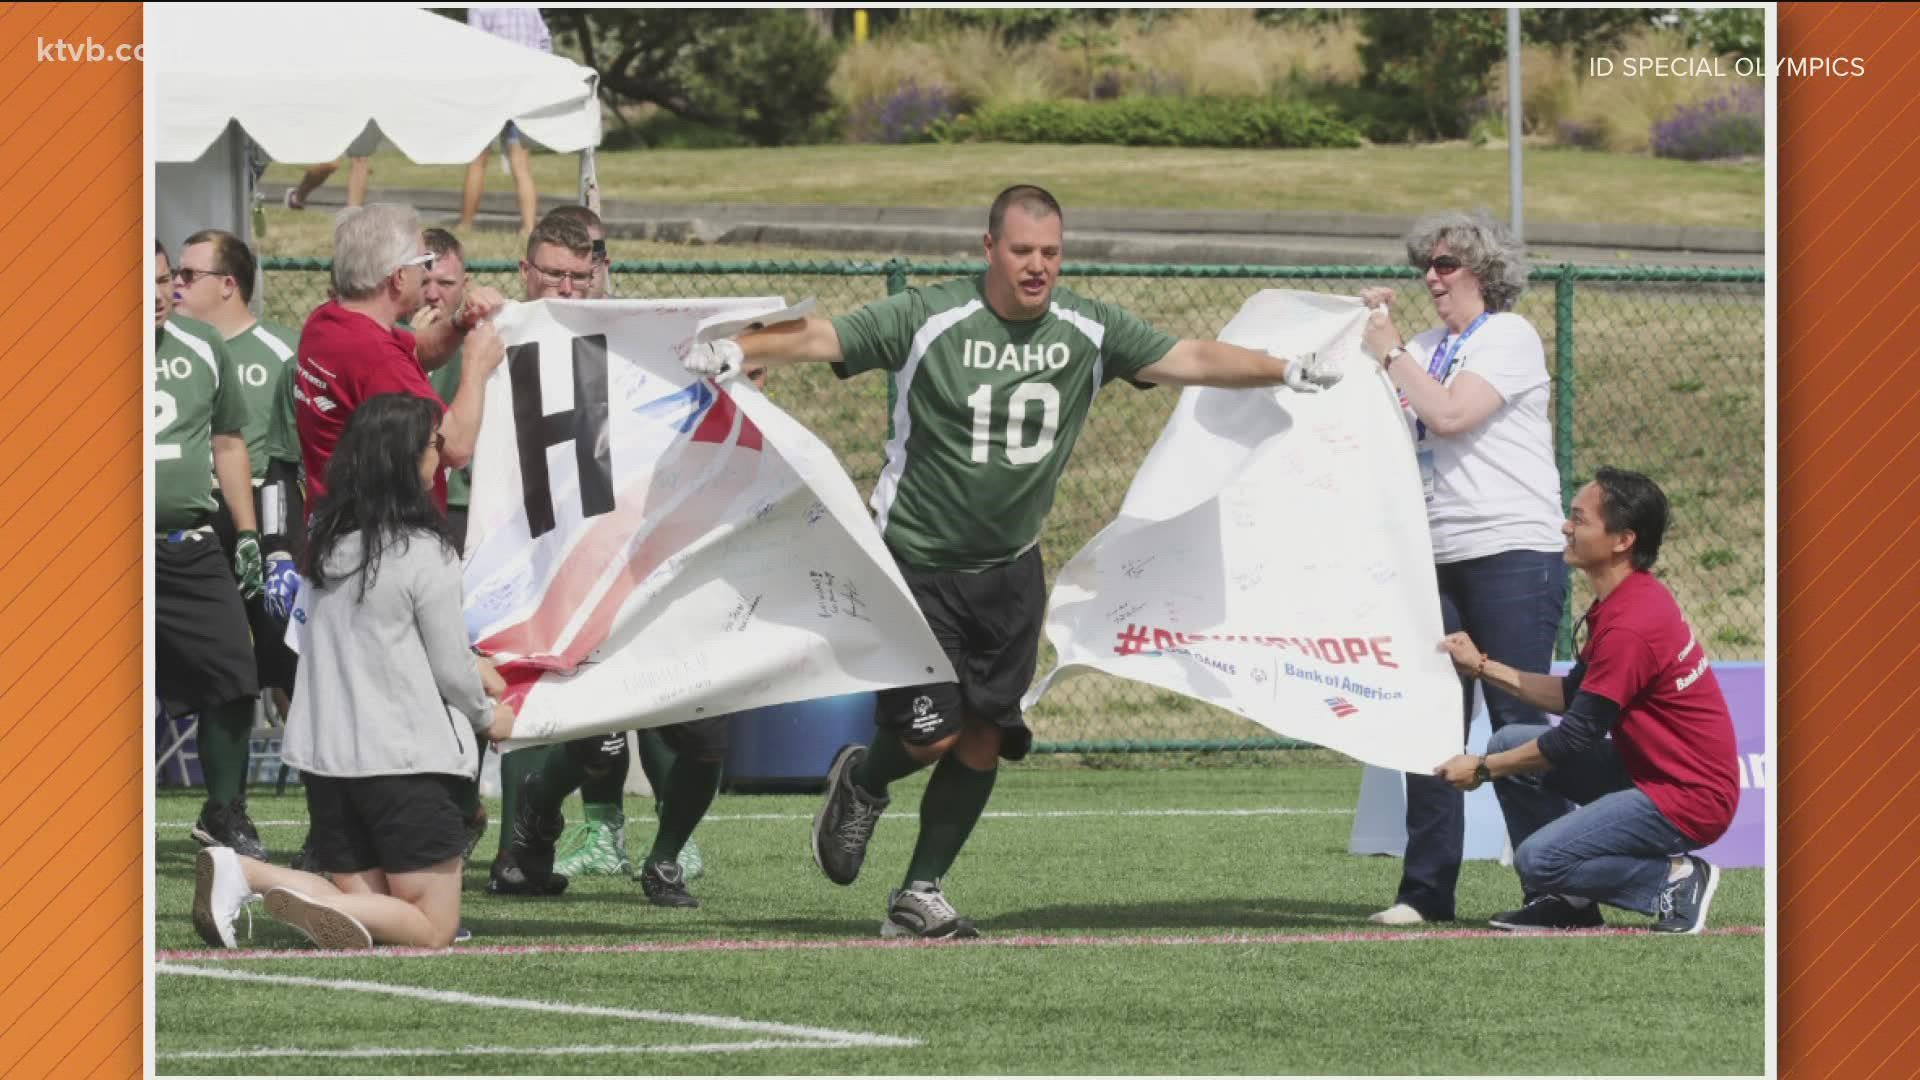 Idaho Special Olympics Athletes will be competing in the USA games with an opportunity to qualify for World Games.